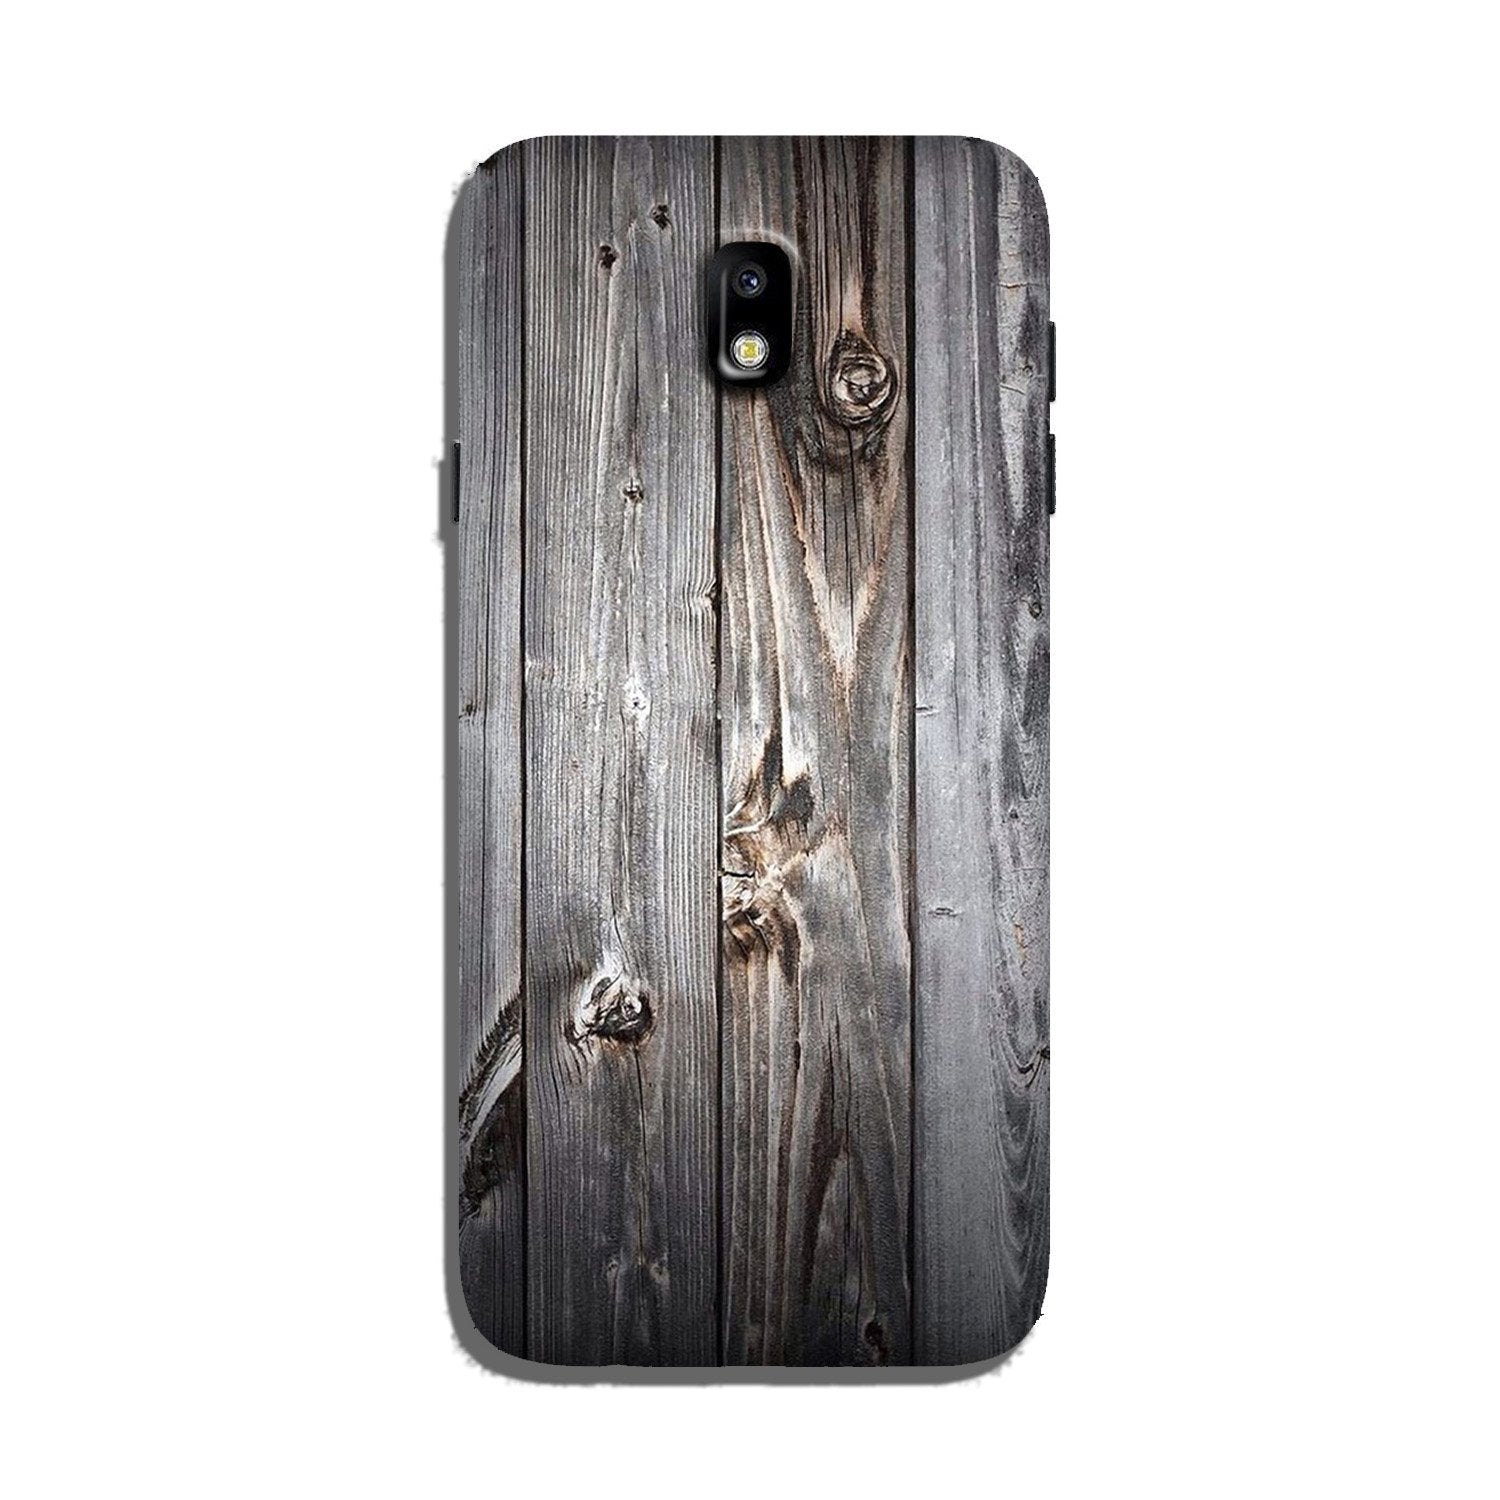 Wooden Look Case for Galaxy J3 Pro(Design - 114)